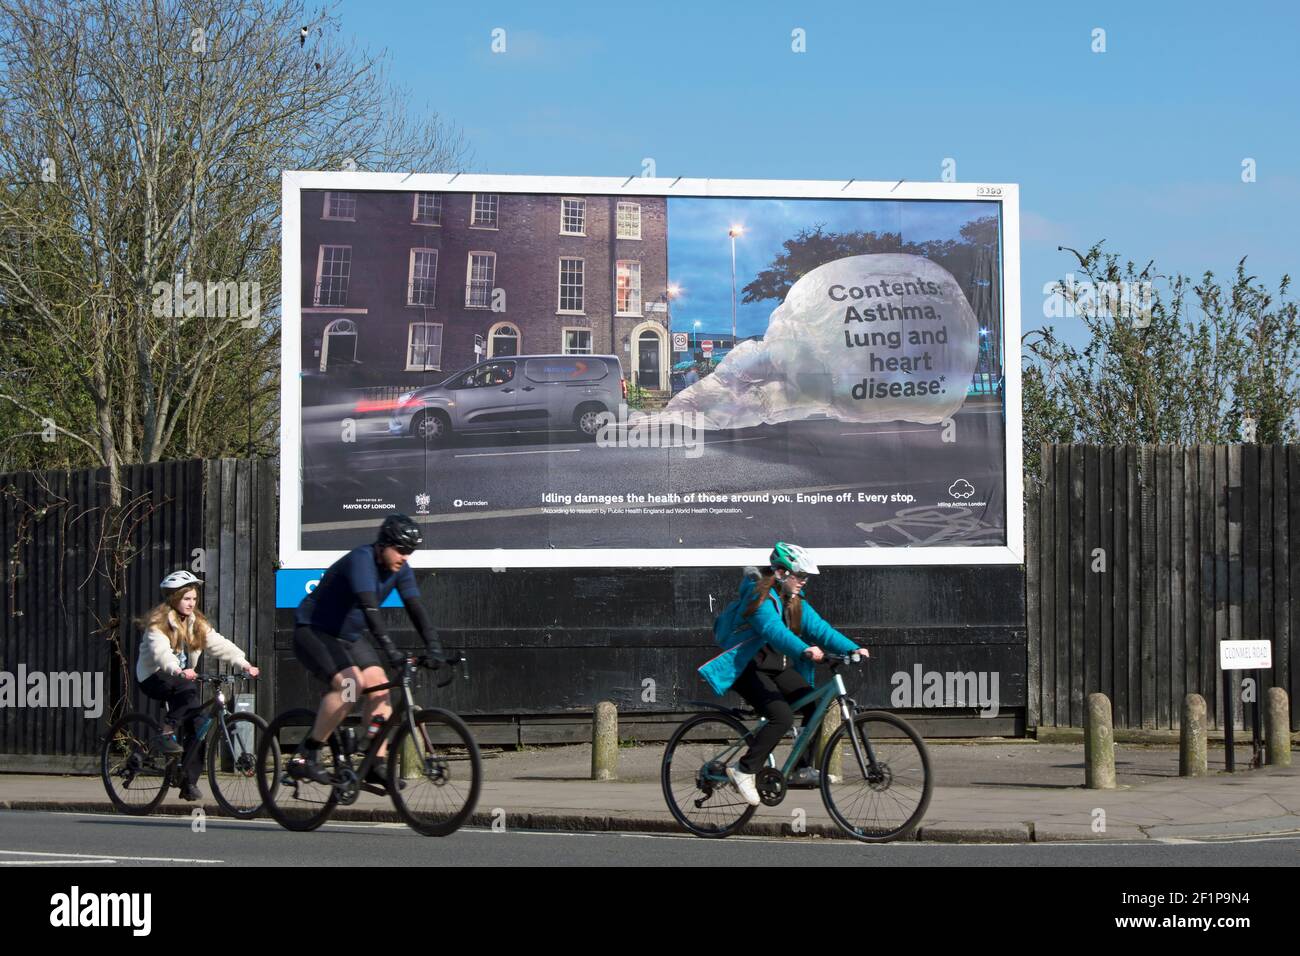 three cyclists pass a billboard warning of the pollution and threat to public health caused by engine idling, in twickenham, middlesex, england Stock Photo